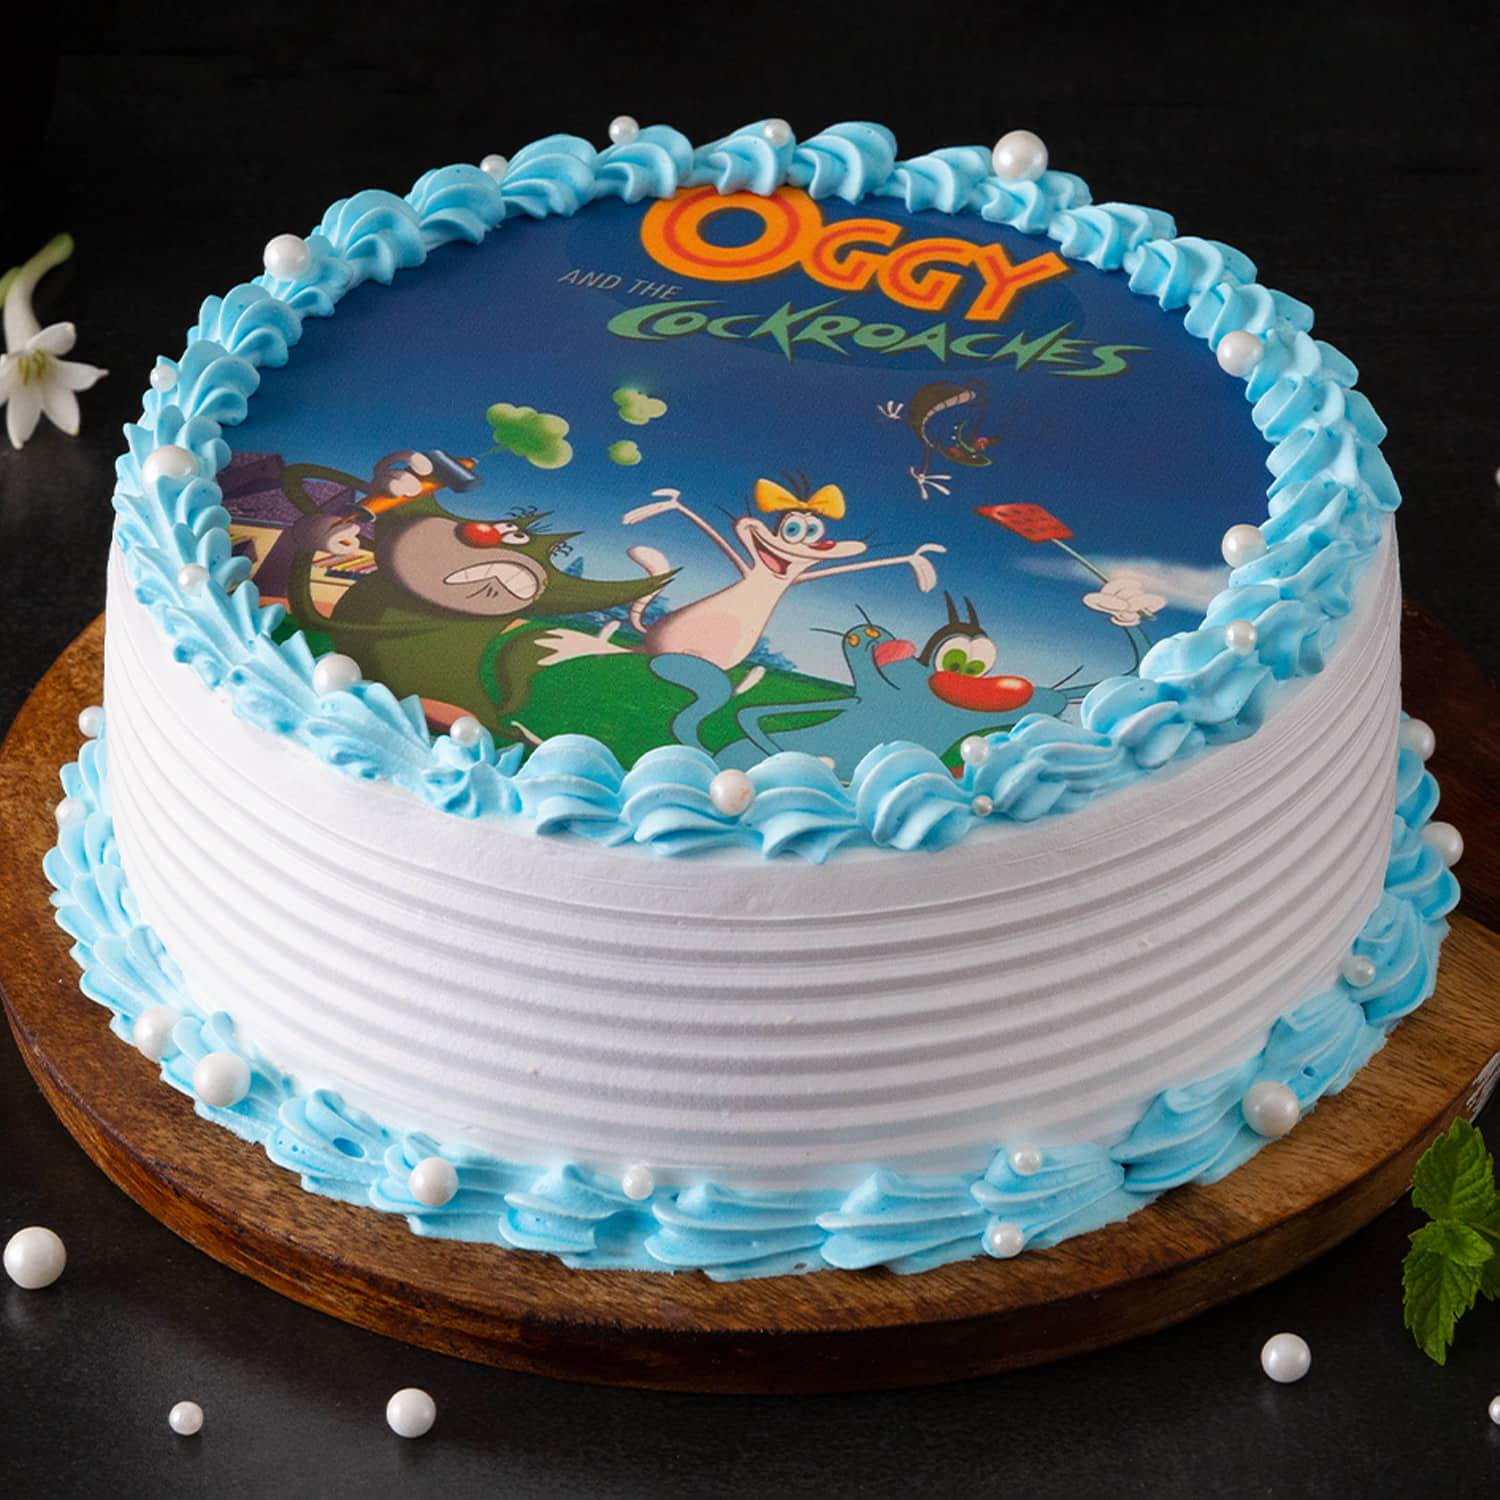 Oggy's Tips 'n' Tricks - How to cook the Oggy Cake! - YouTube